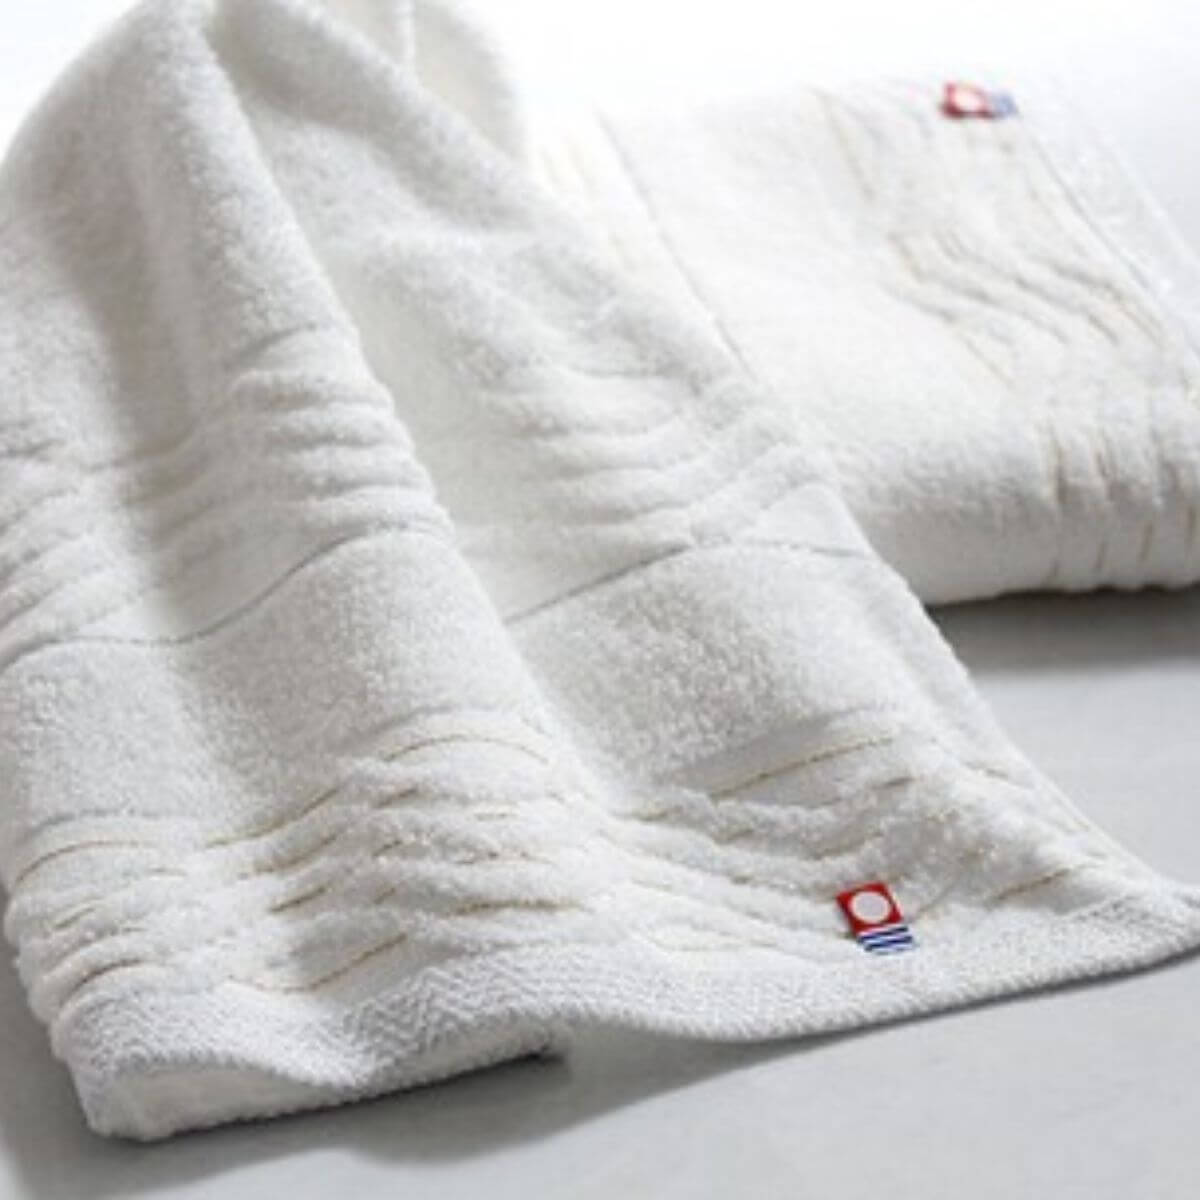 Japanese Imabari Bath Towel 2pcs Cotton 100% 125 x 65cm White Red Made in JAPAN 